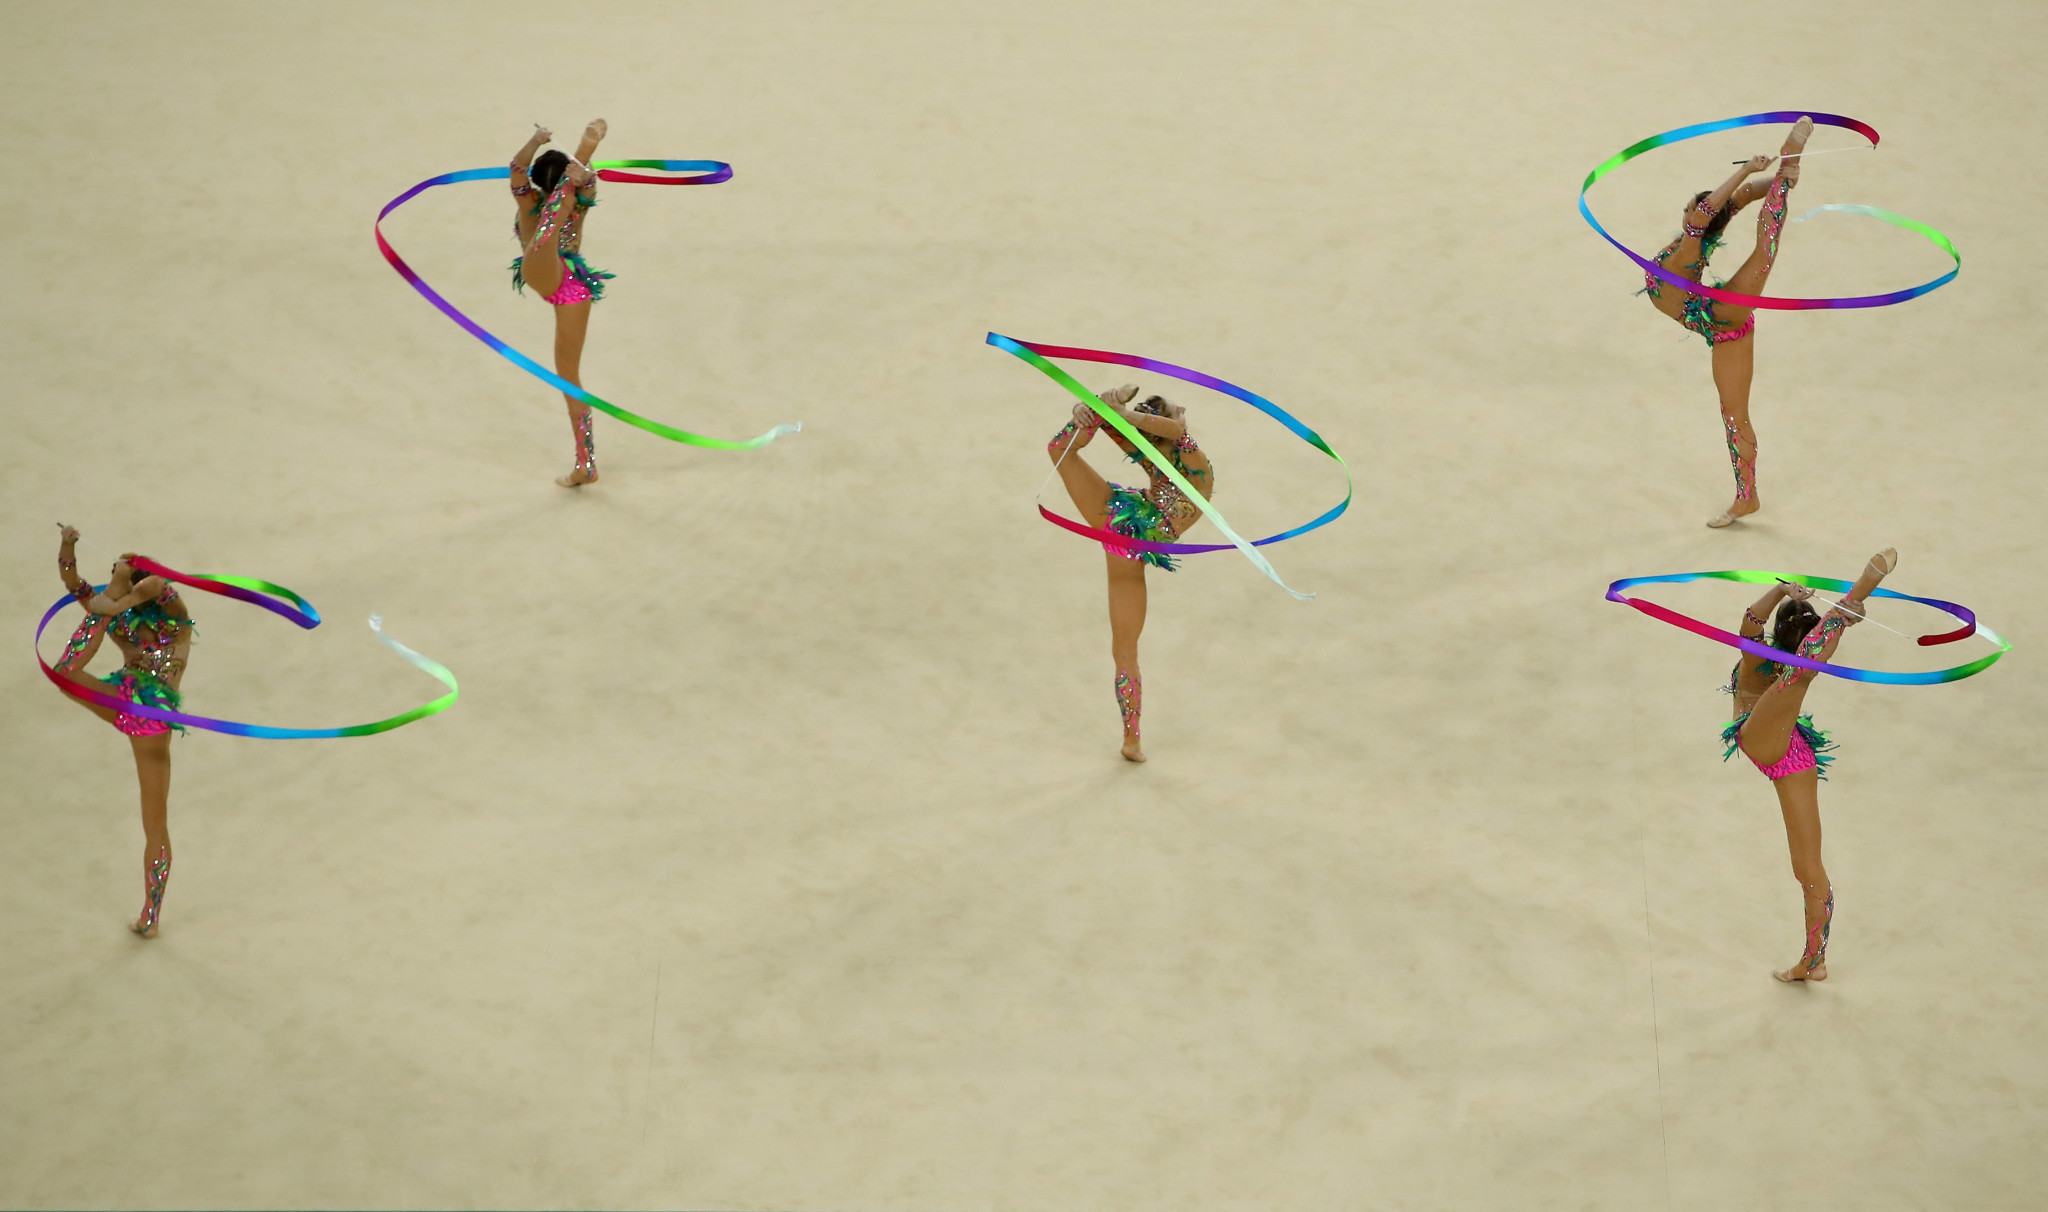 Around 300 athletes from 39 countries have entered the European Rhythmic Gymnastics Championships, scheduled for November ©Getty Images